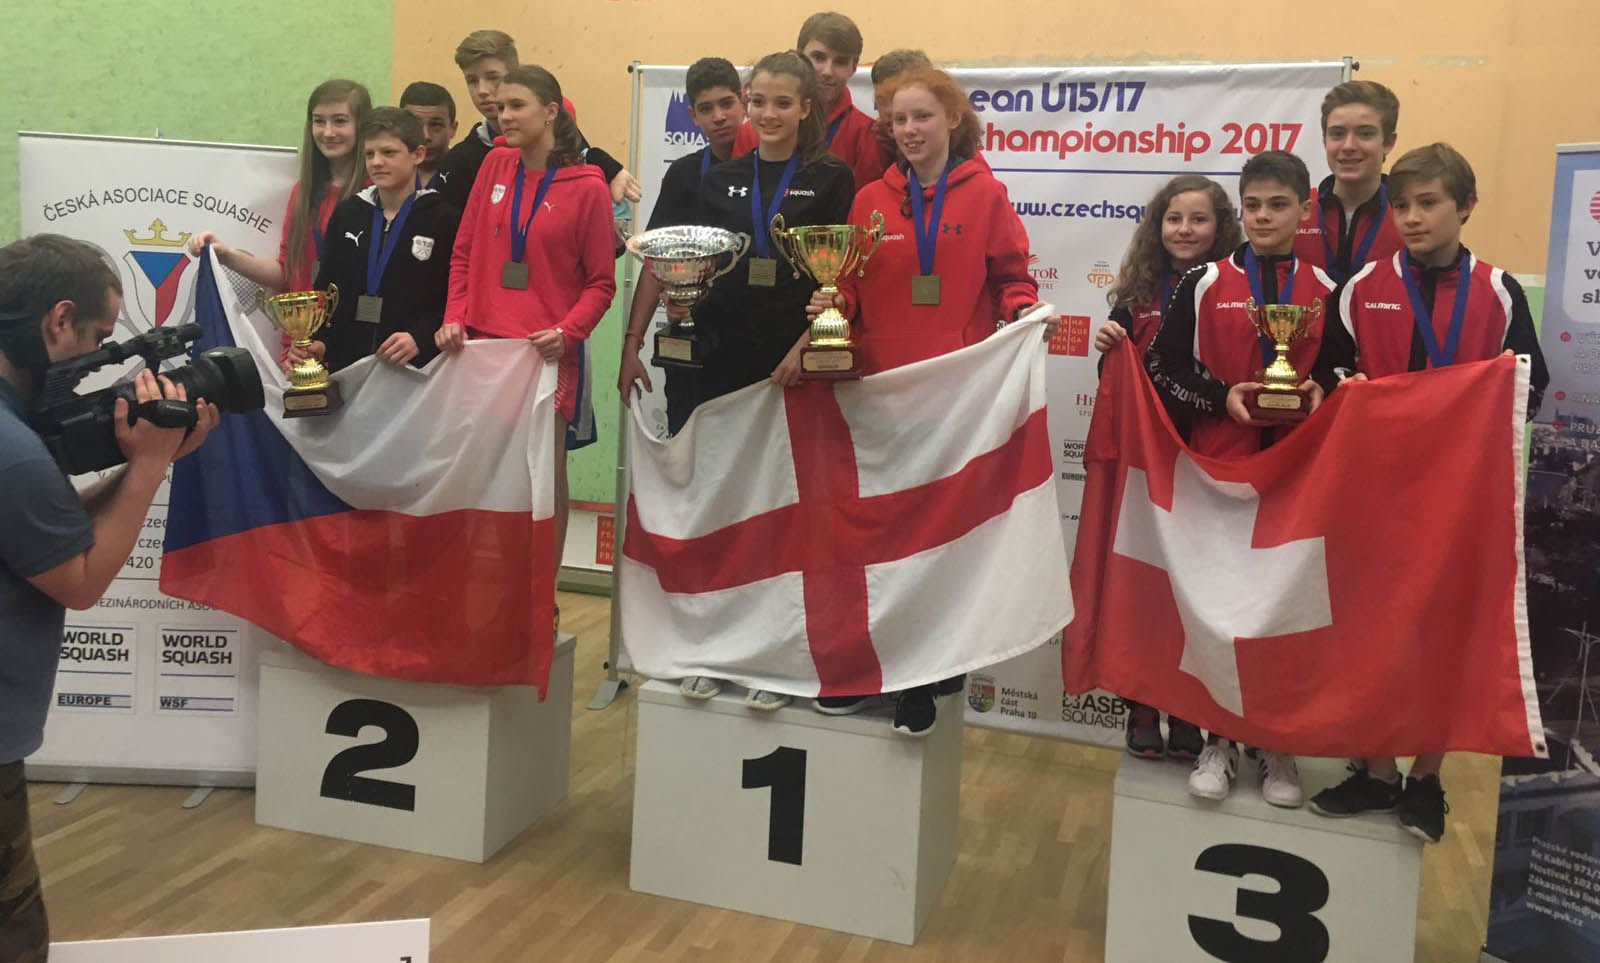 England beat competition from the Czech Republic and Switzerland to win the under-15 European Team Championship